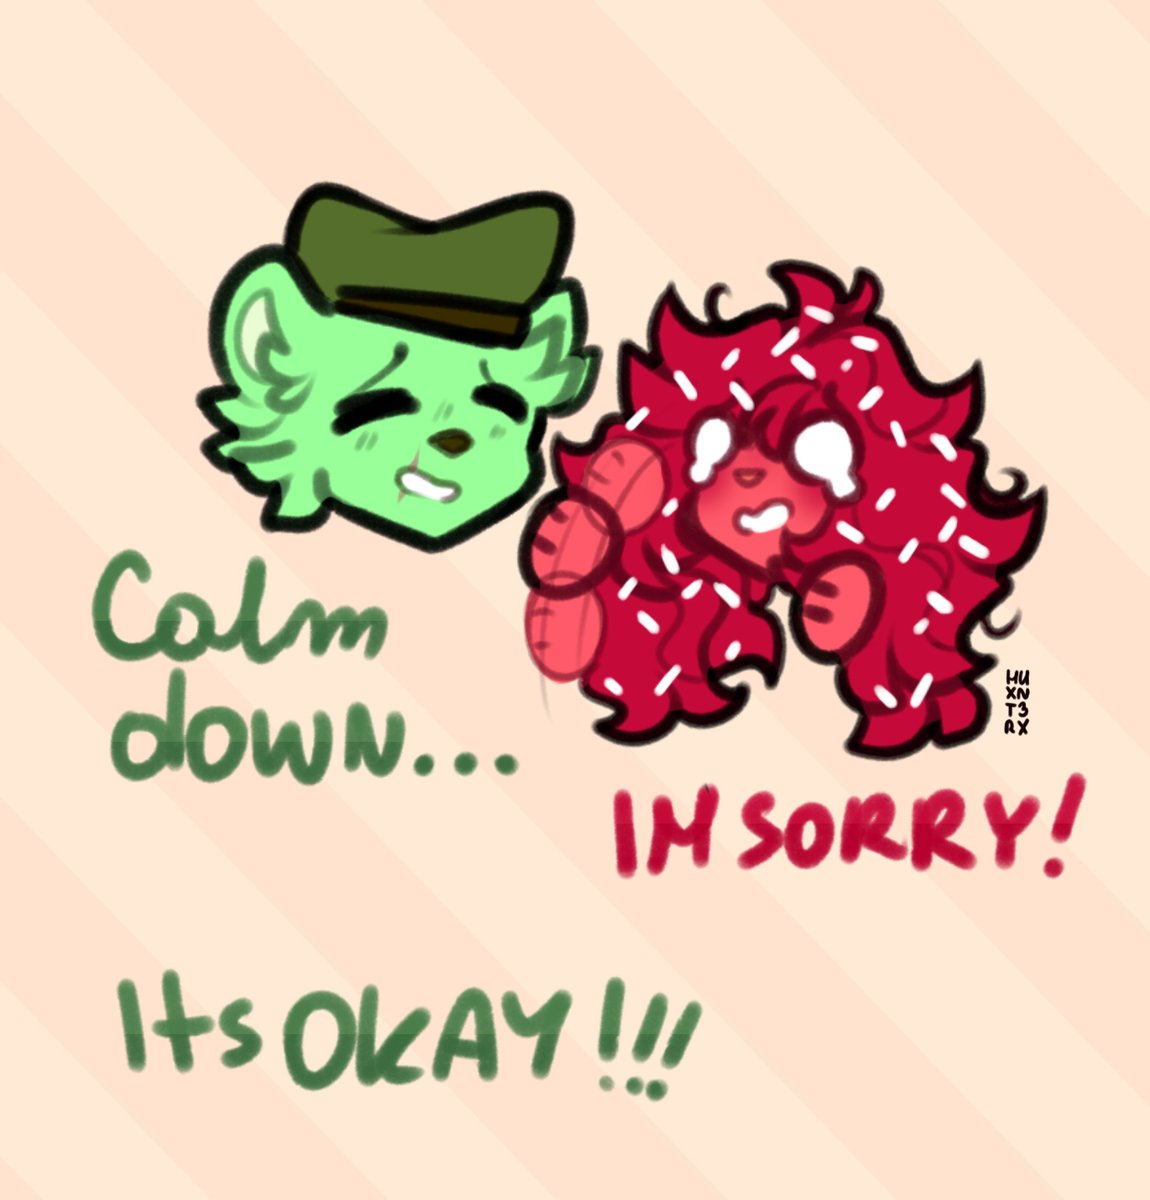 Oops, Huggin might be hard sometimes
But why tf his TONGUE? Kinda sus
#htf #happytreefriends  #flippyxflaky
Art by me